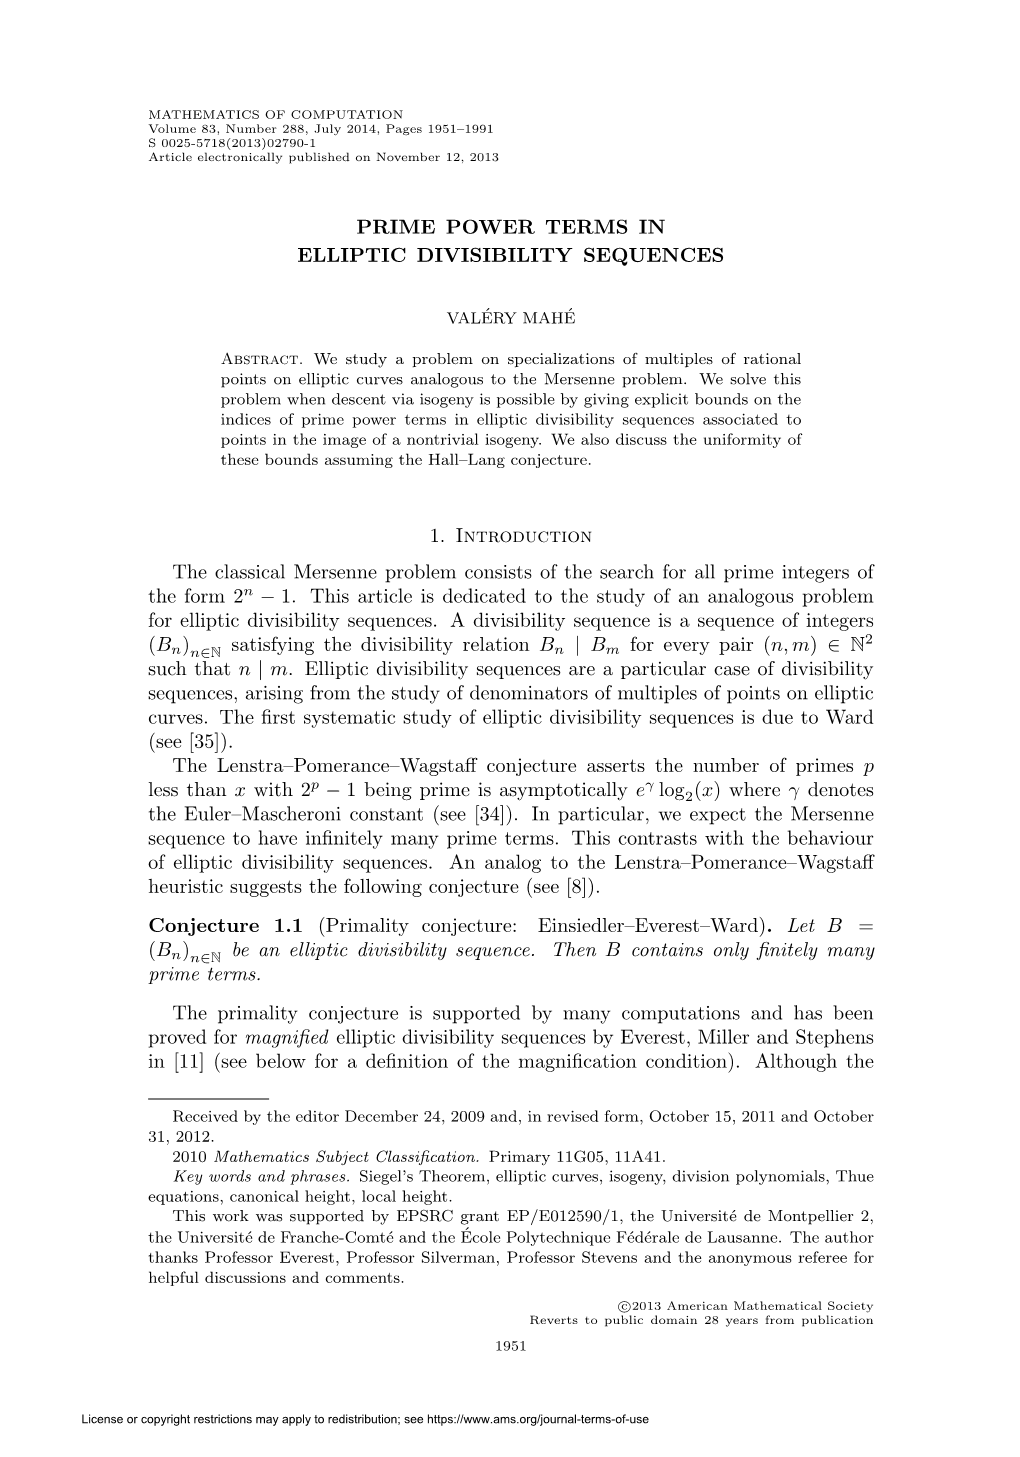 Prime Power Terms in Elliptic Divisibility Sequences